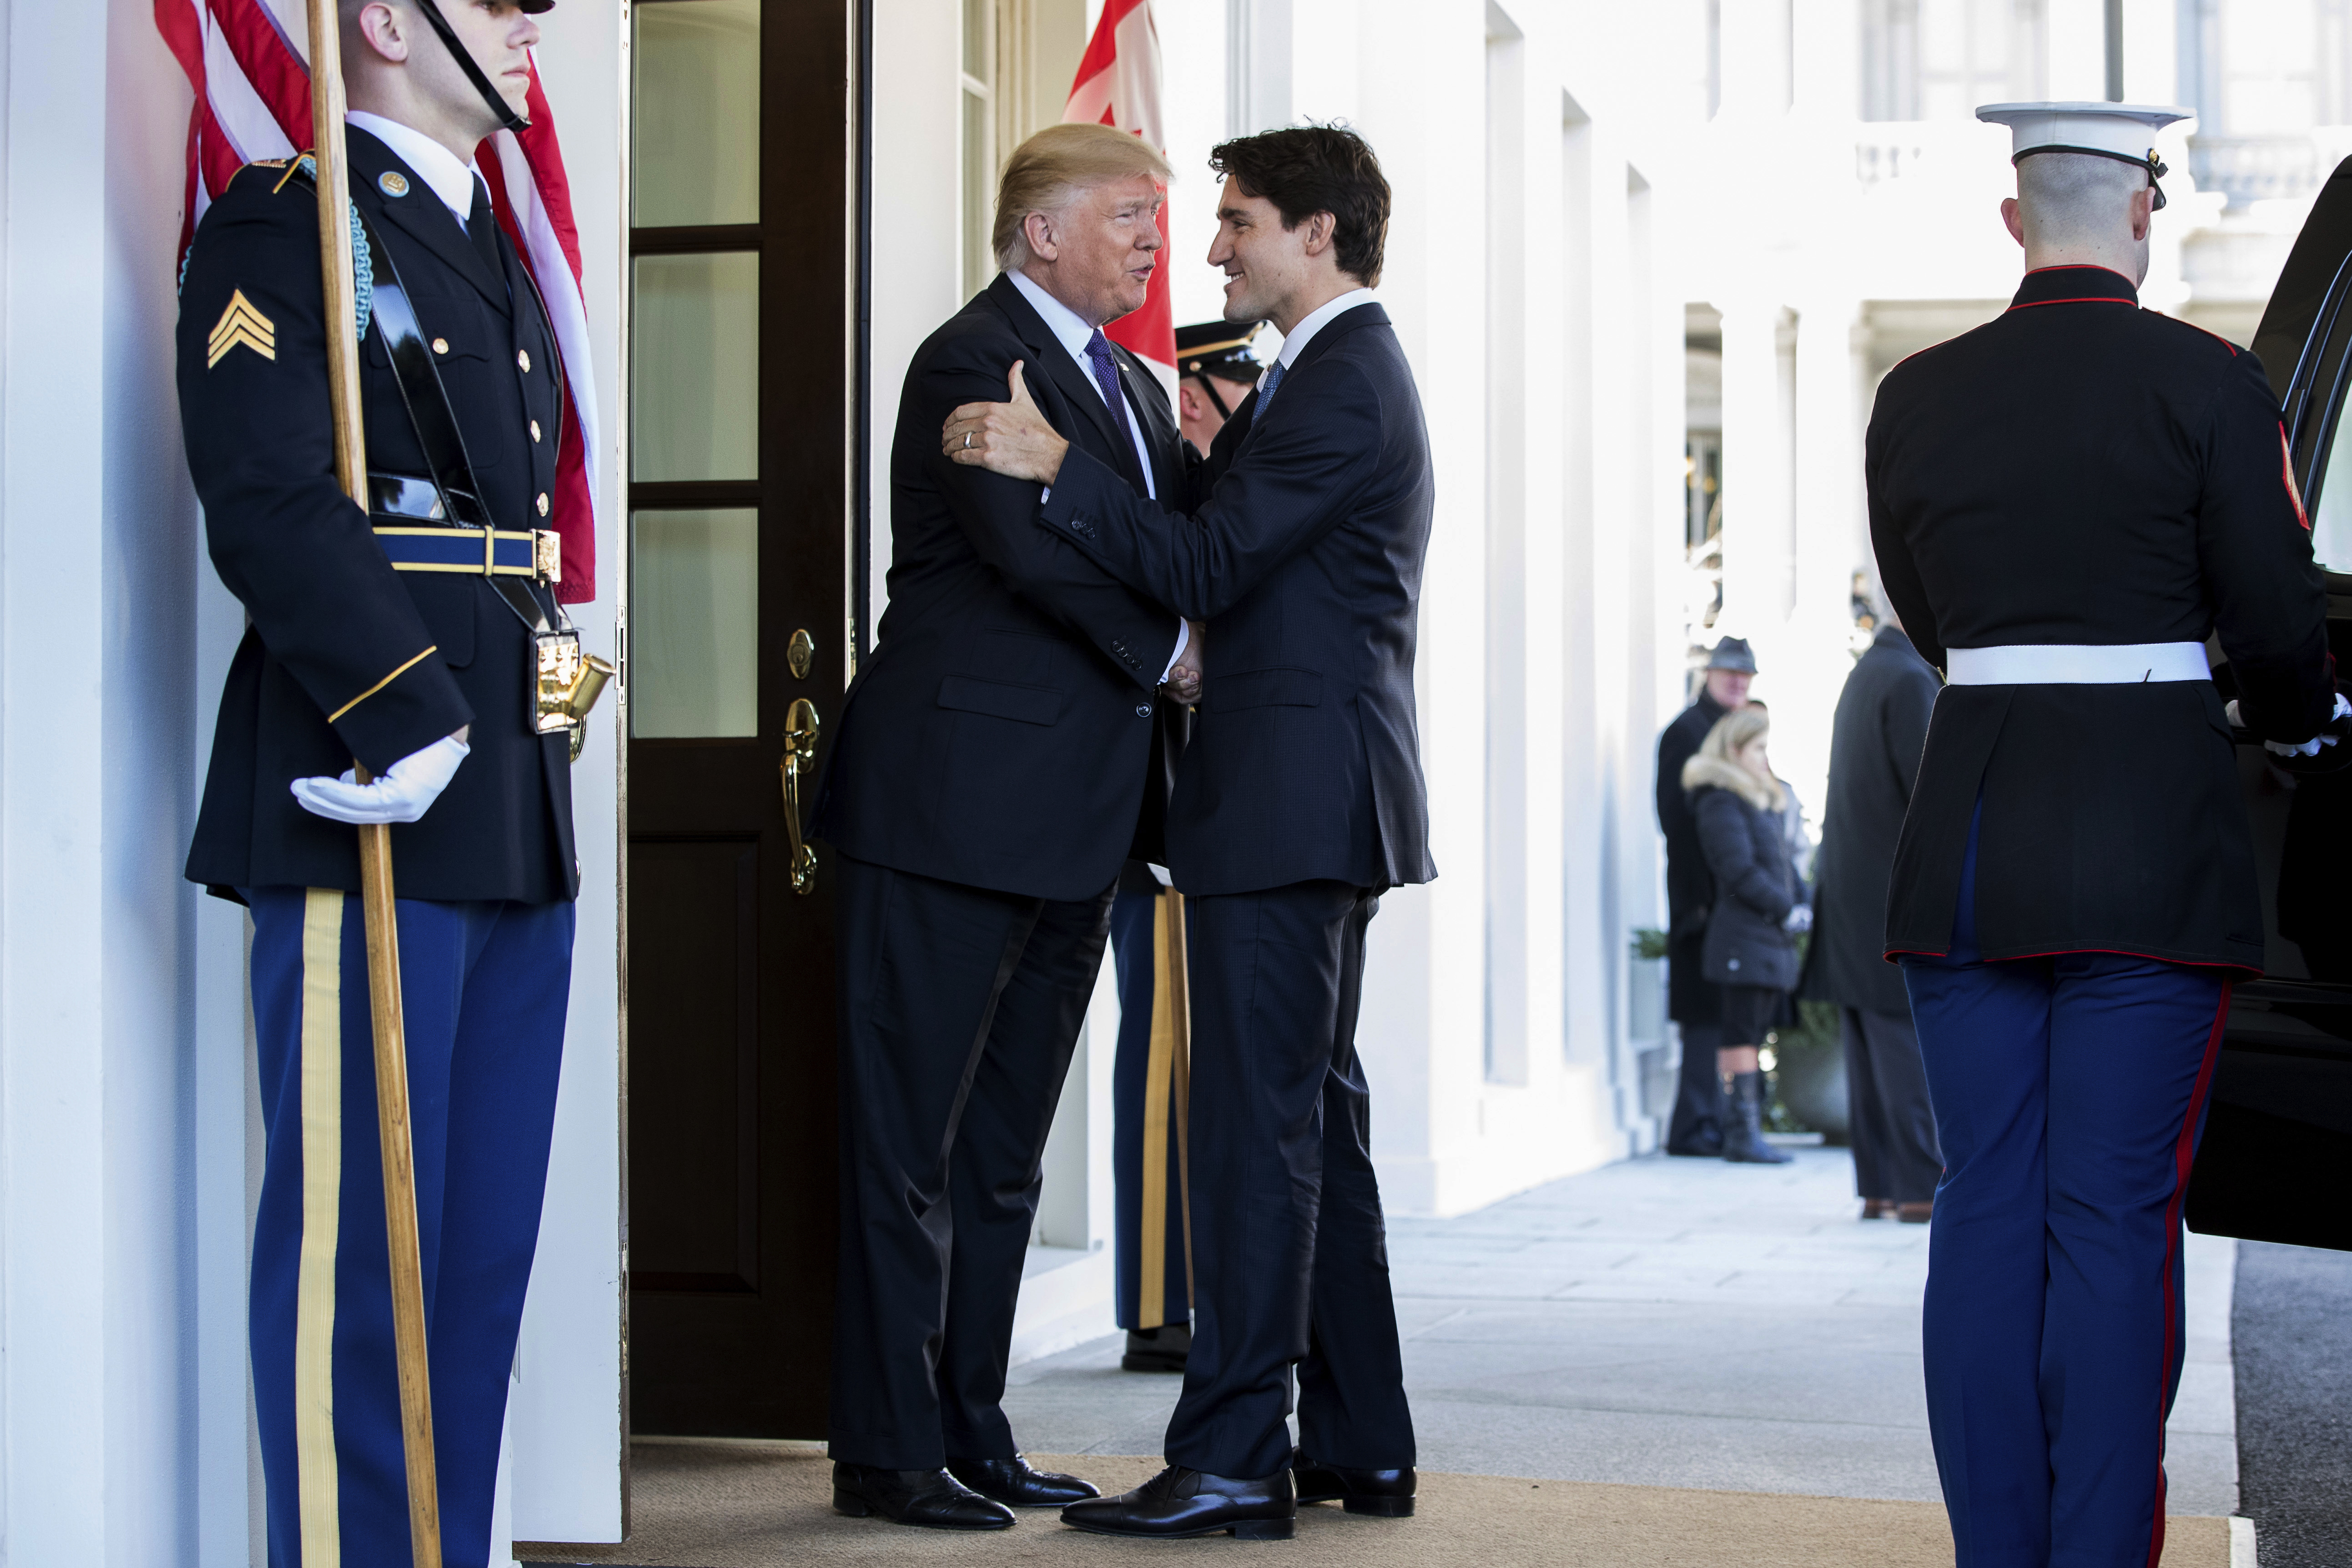 foto : andrew harnik : president donald trump welcomes canadian prime minister justin trudeau outside the west wing of the white house in washington, monday, feb. 13, 2017. (ap photo/andrew harnik)